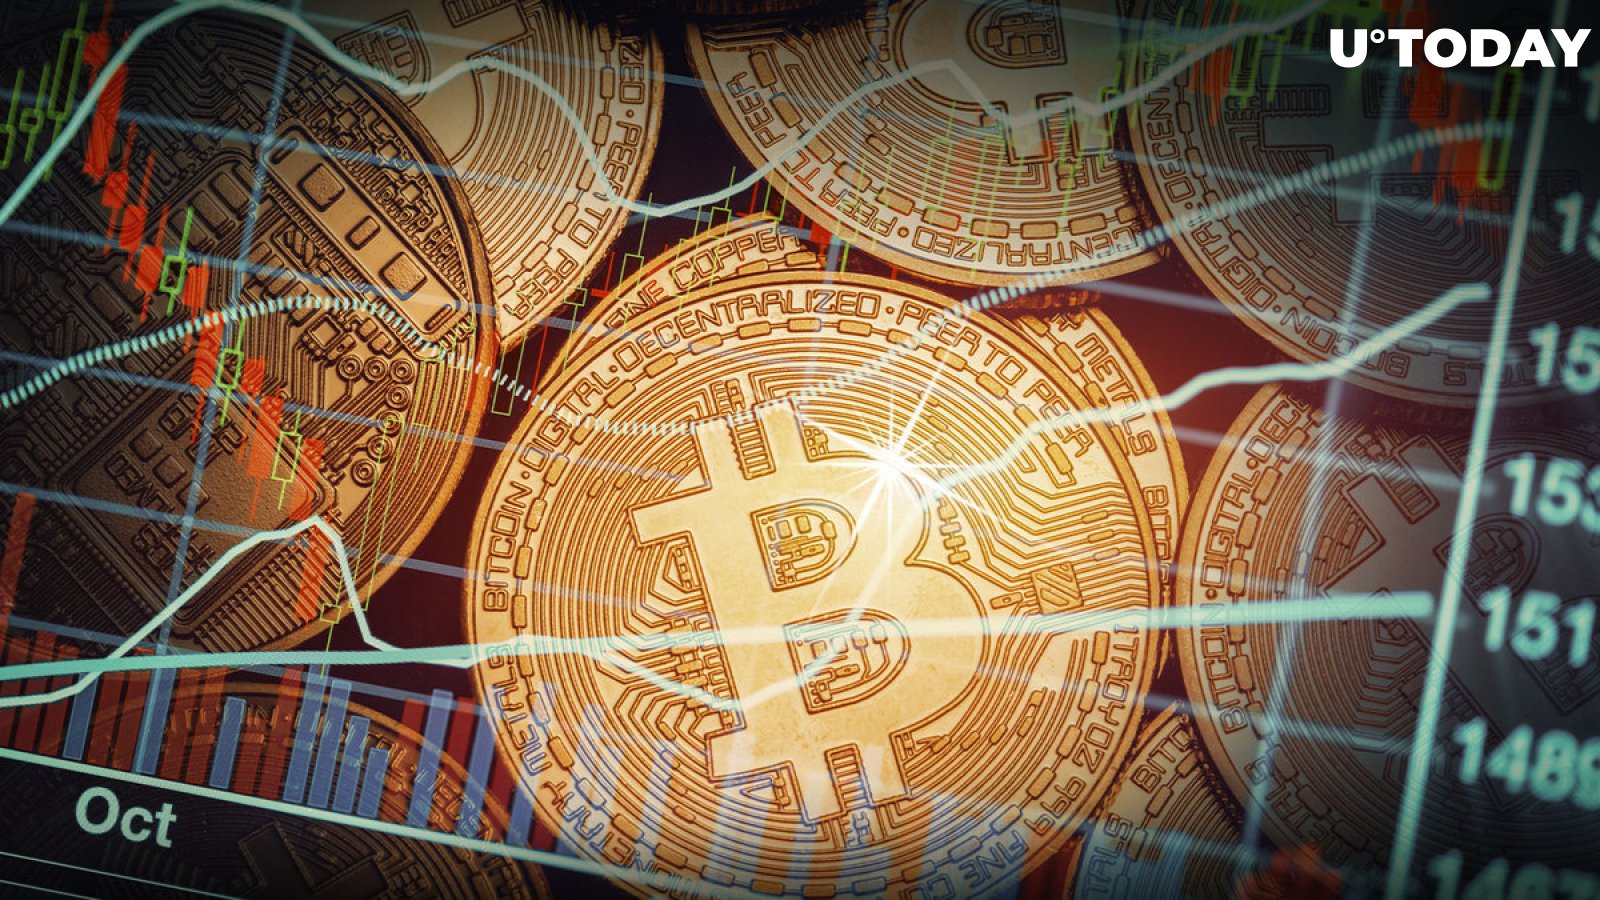 Bitcoin Price Today Will Depend on This Crucial Factor: Report